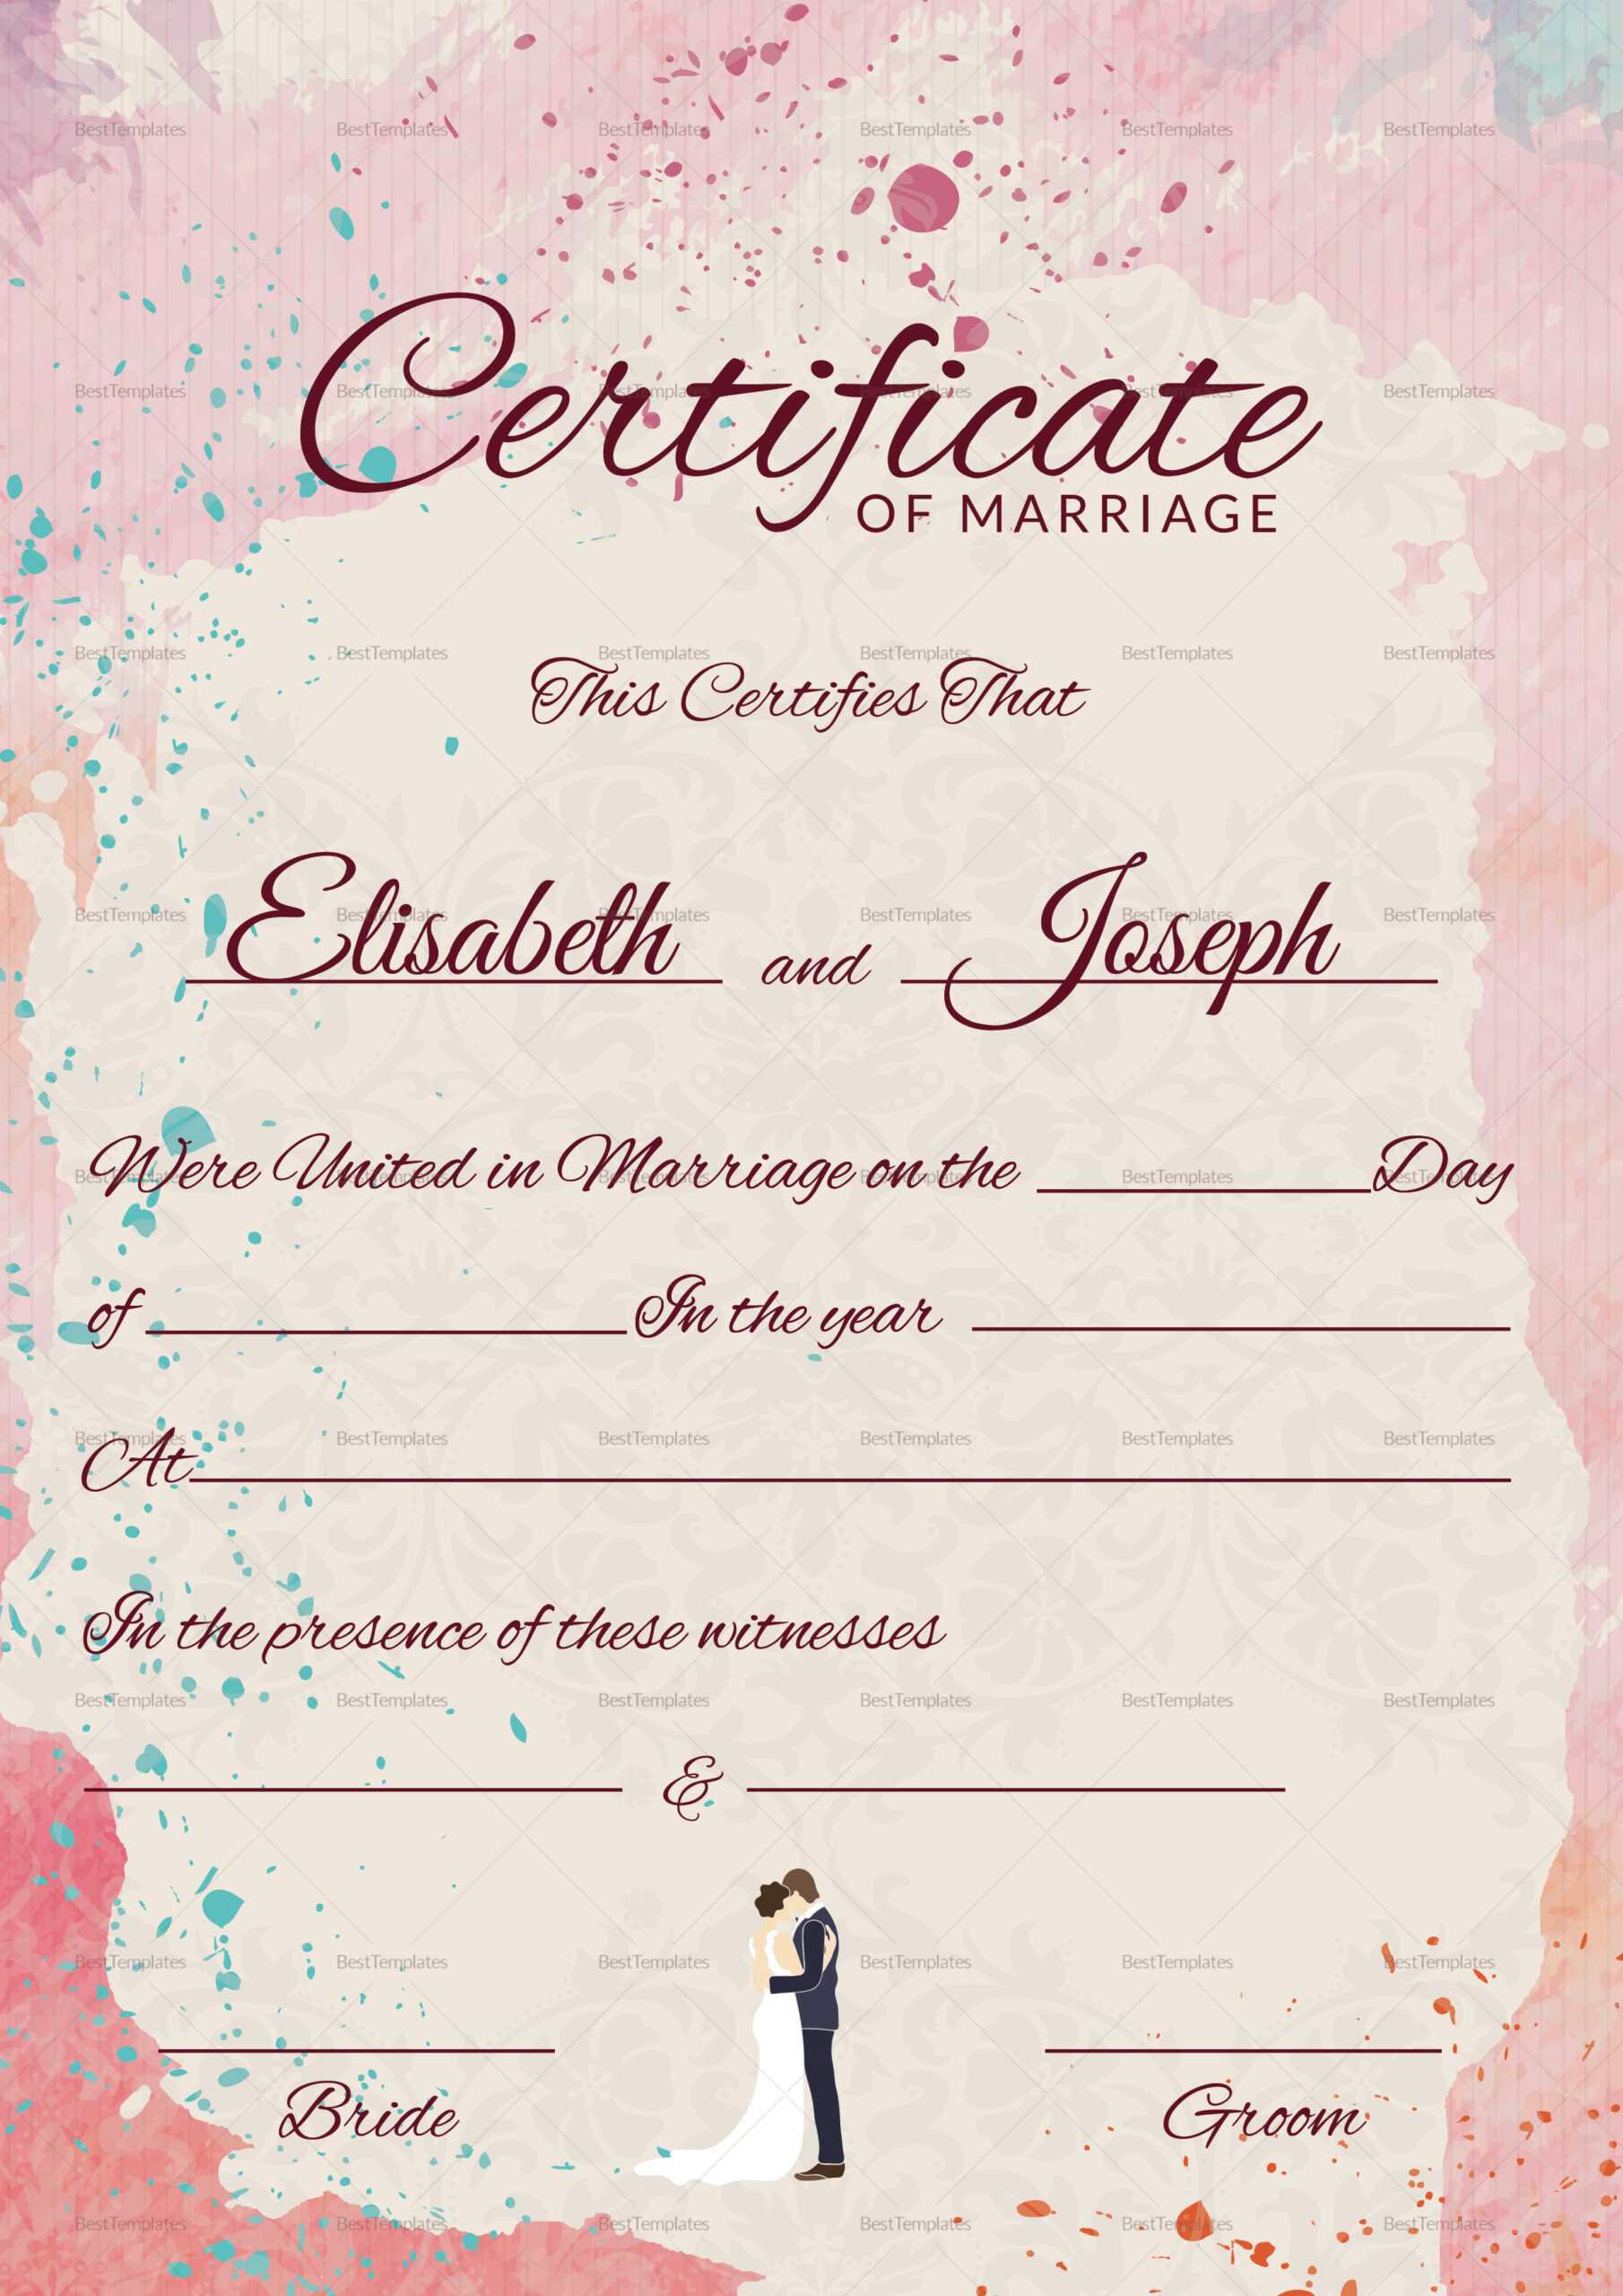 Christian Marriage Certificate Template With Certificate Of Marriage Template